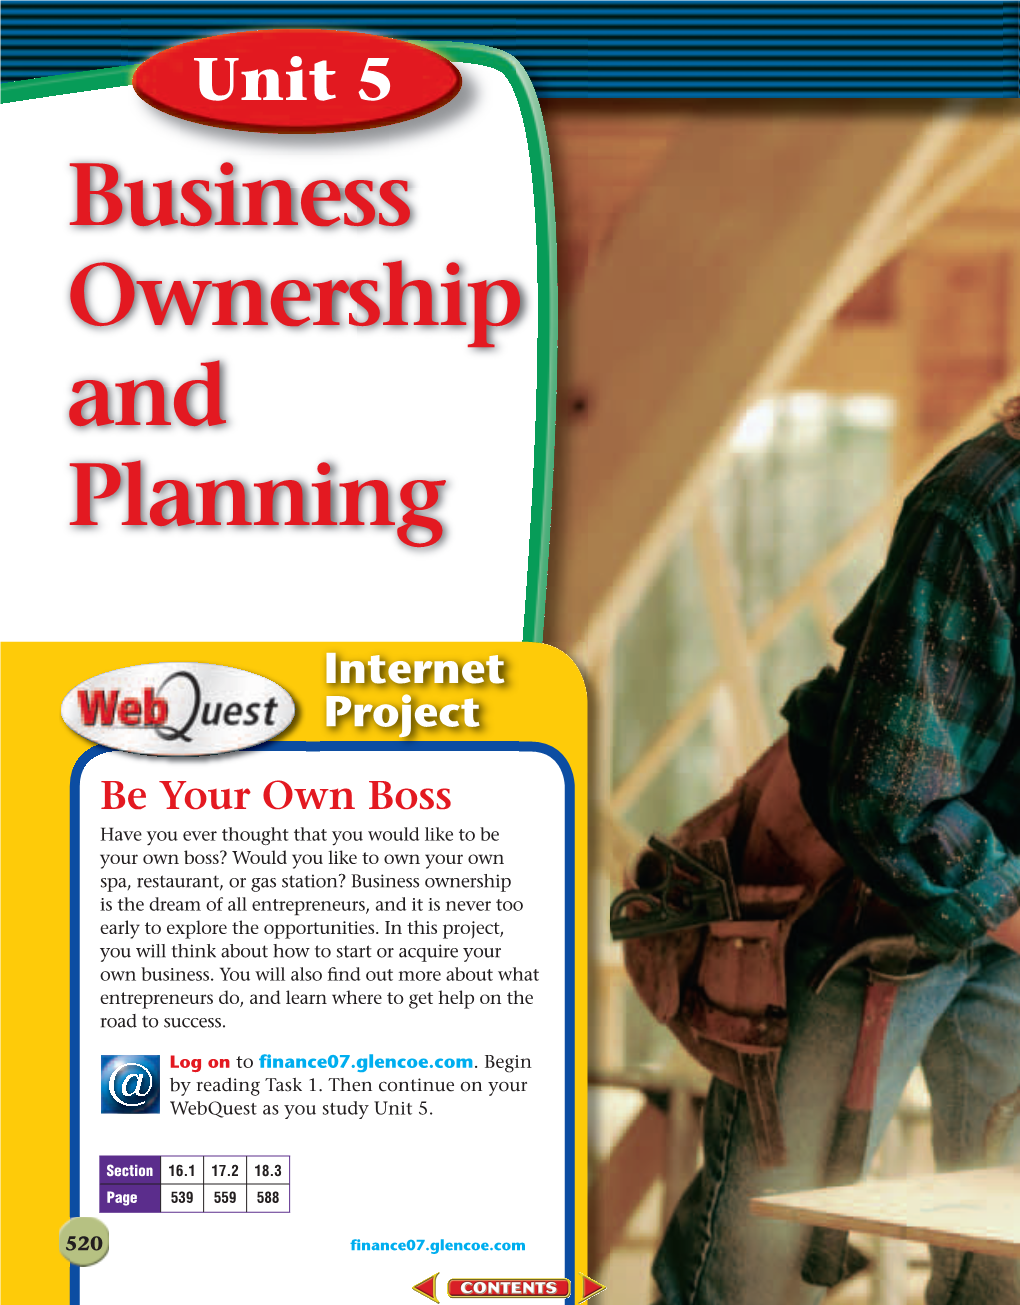 Chapter 16: Types of Business Ownership